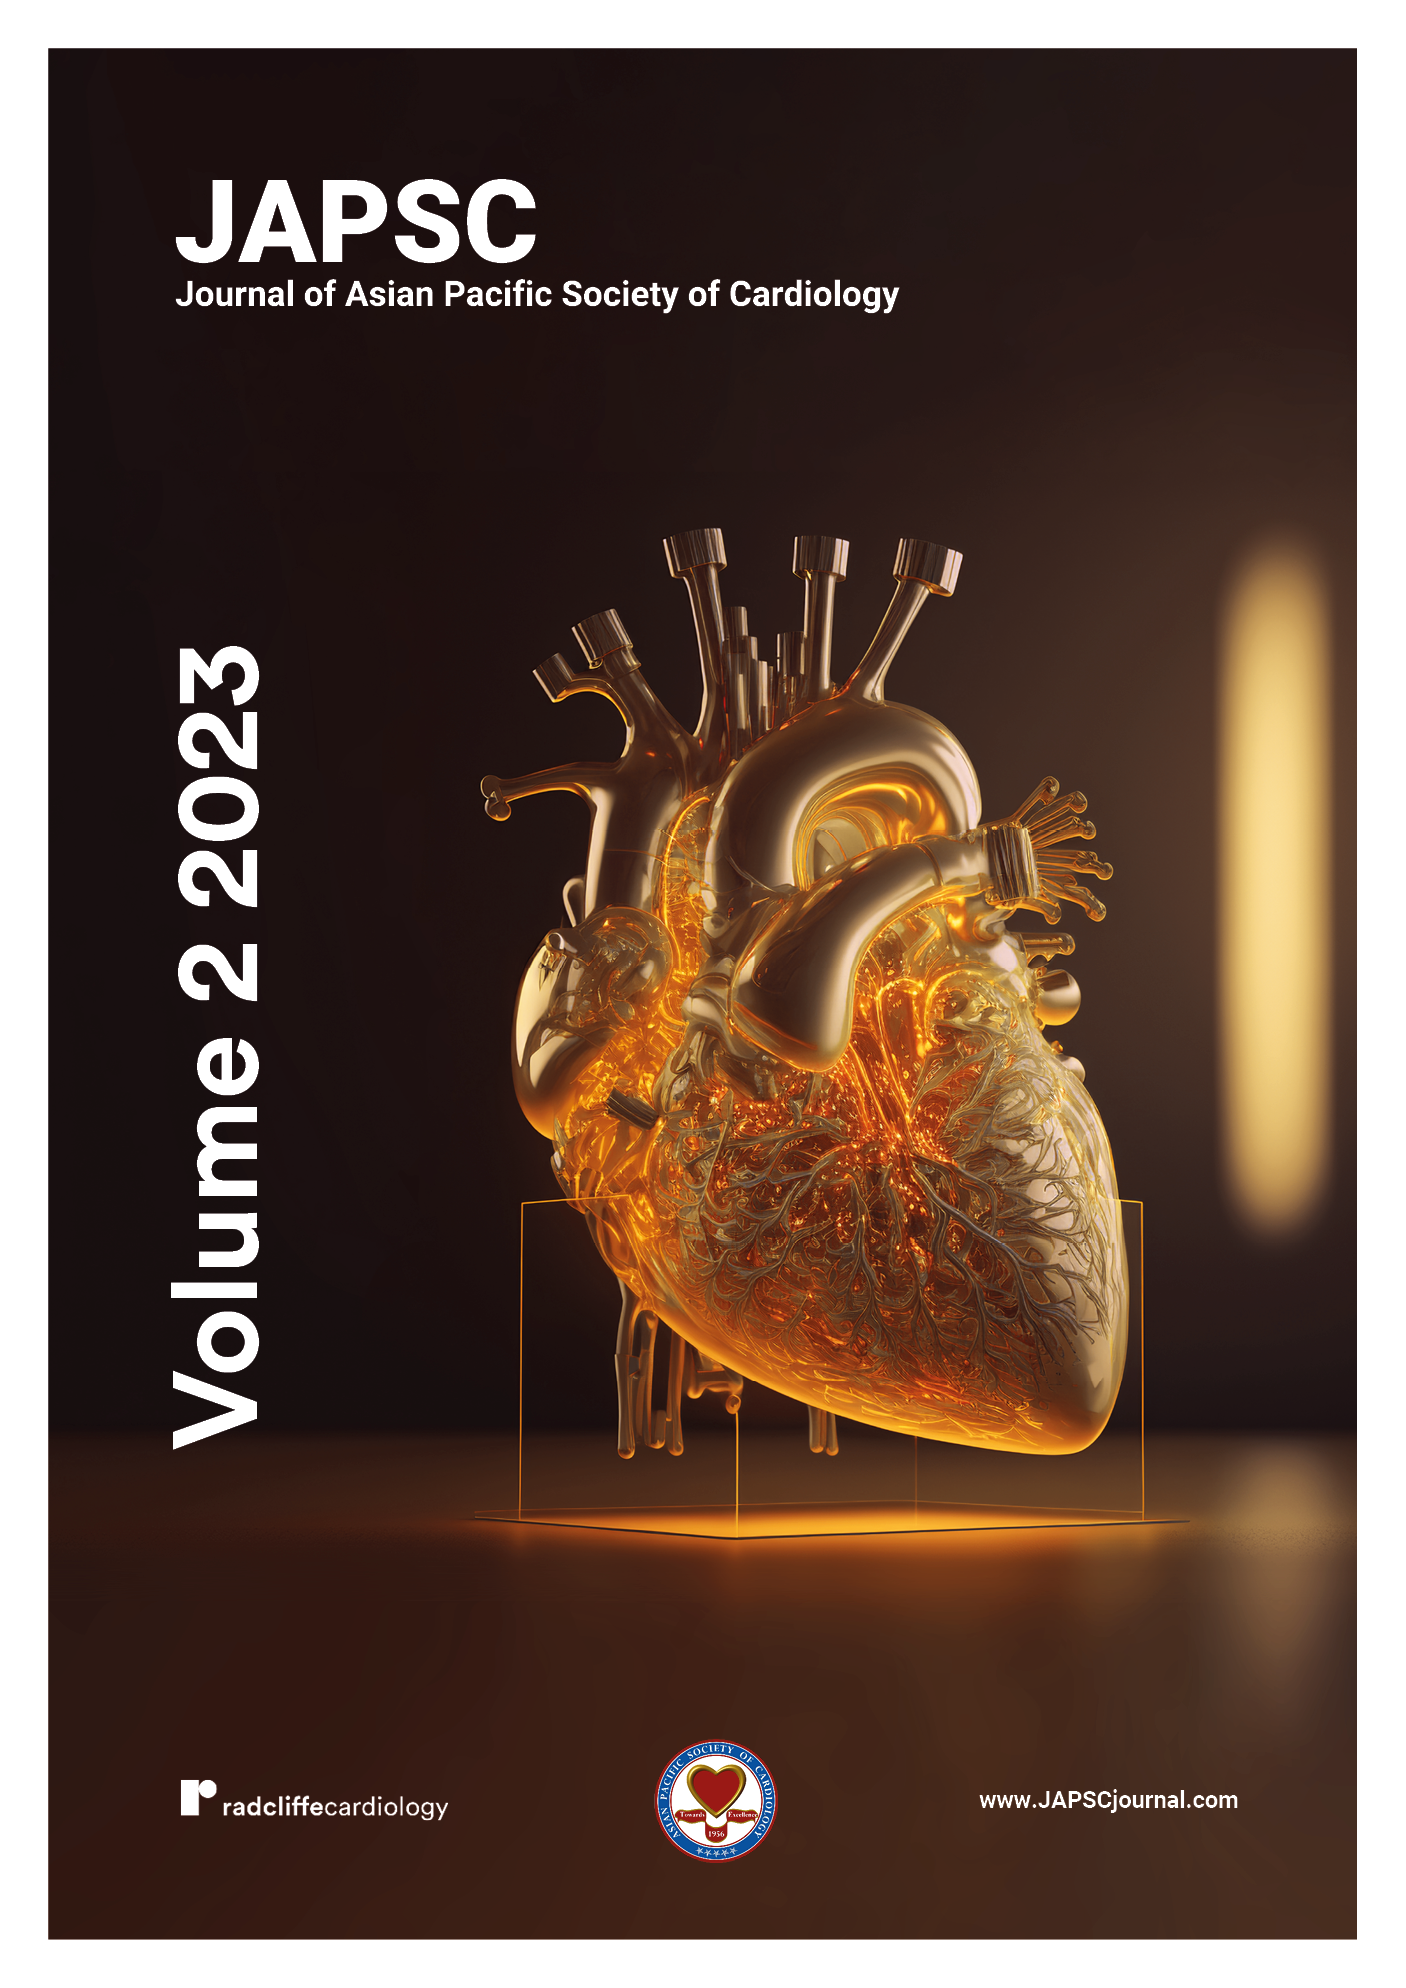 Journal of Asian Pacific Society of Cardiology